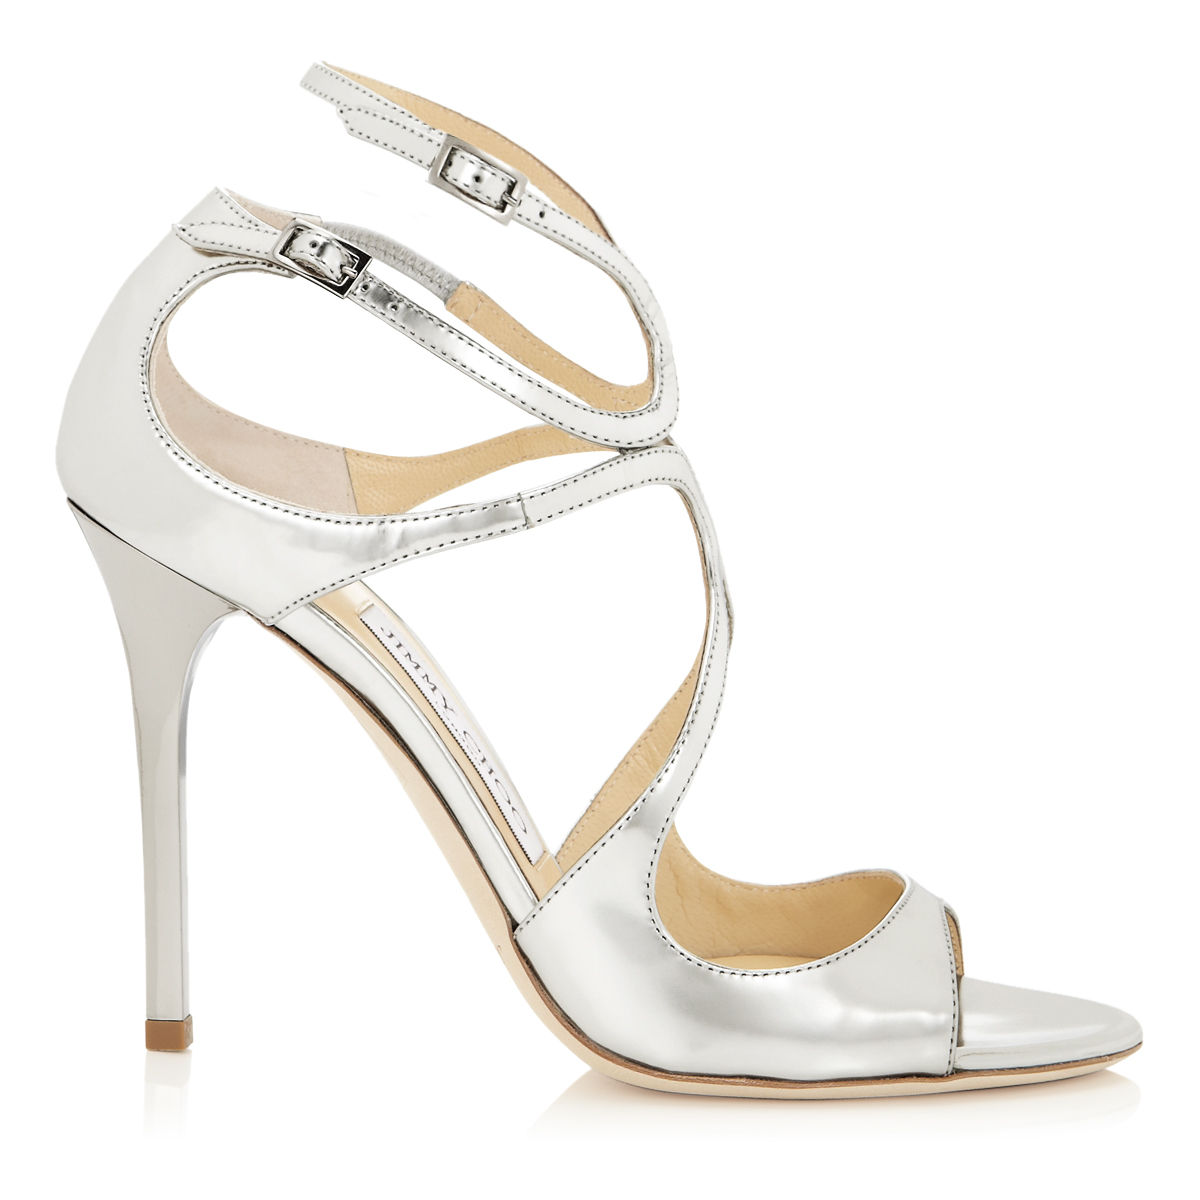 Jimmy Choo Leather 'lang' Sandals in Silver (Metallic) - Lyst